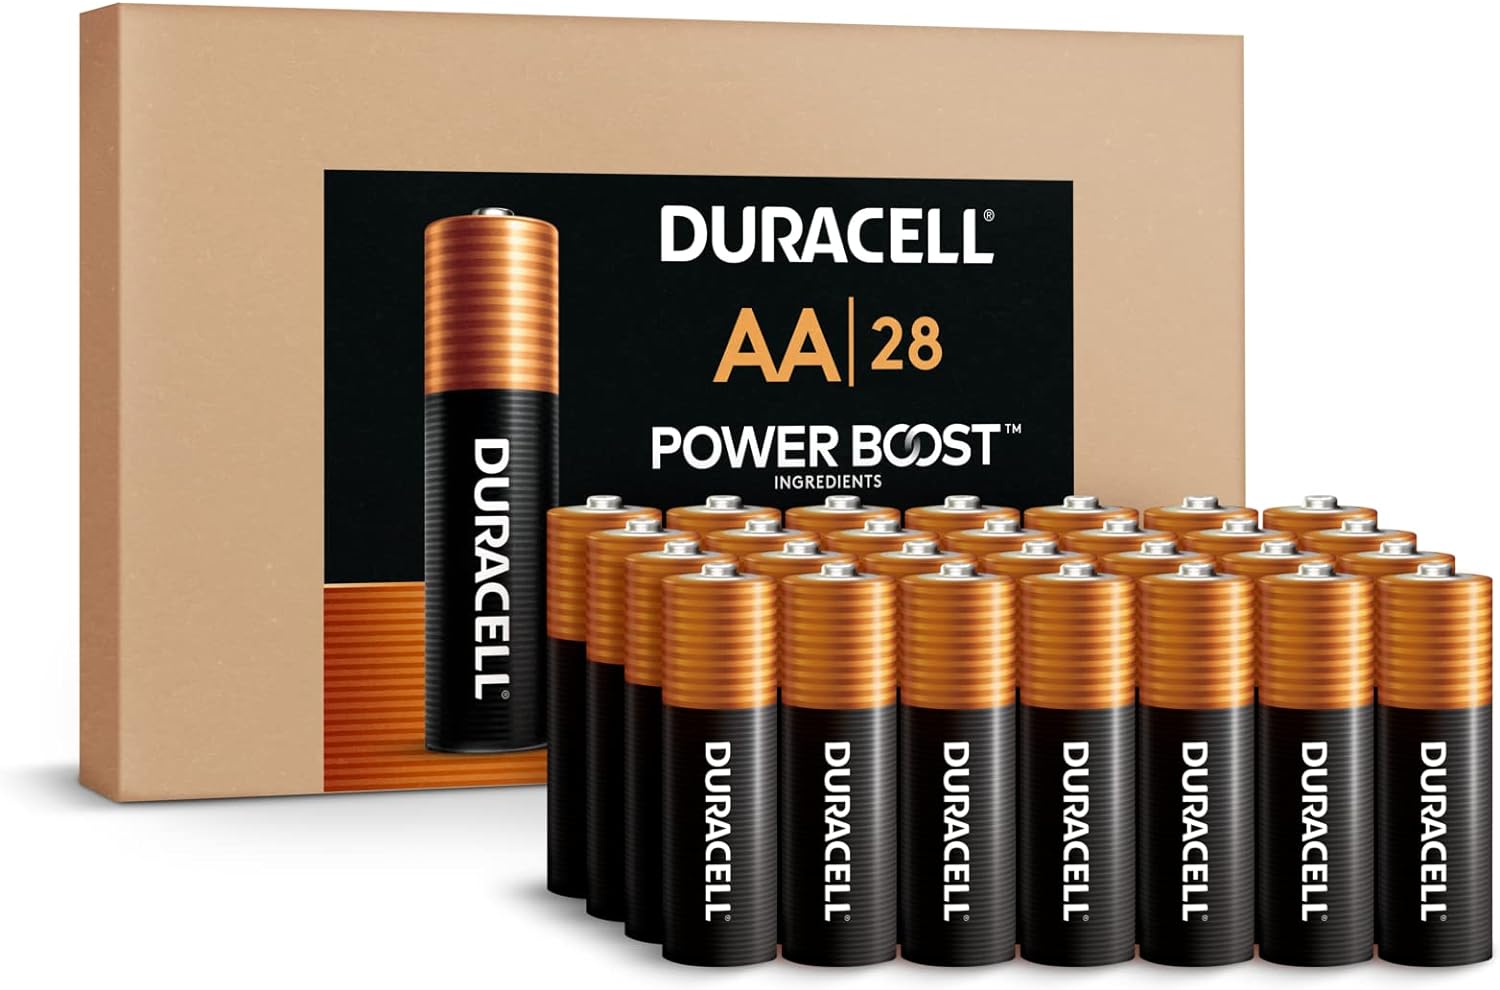 $15.02 /w S&S: Duracell Coppertop AA Batteries, 28 Count